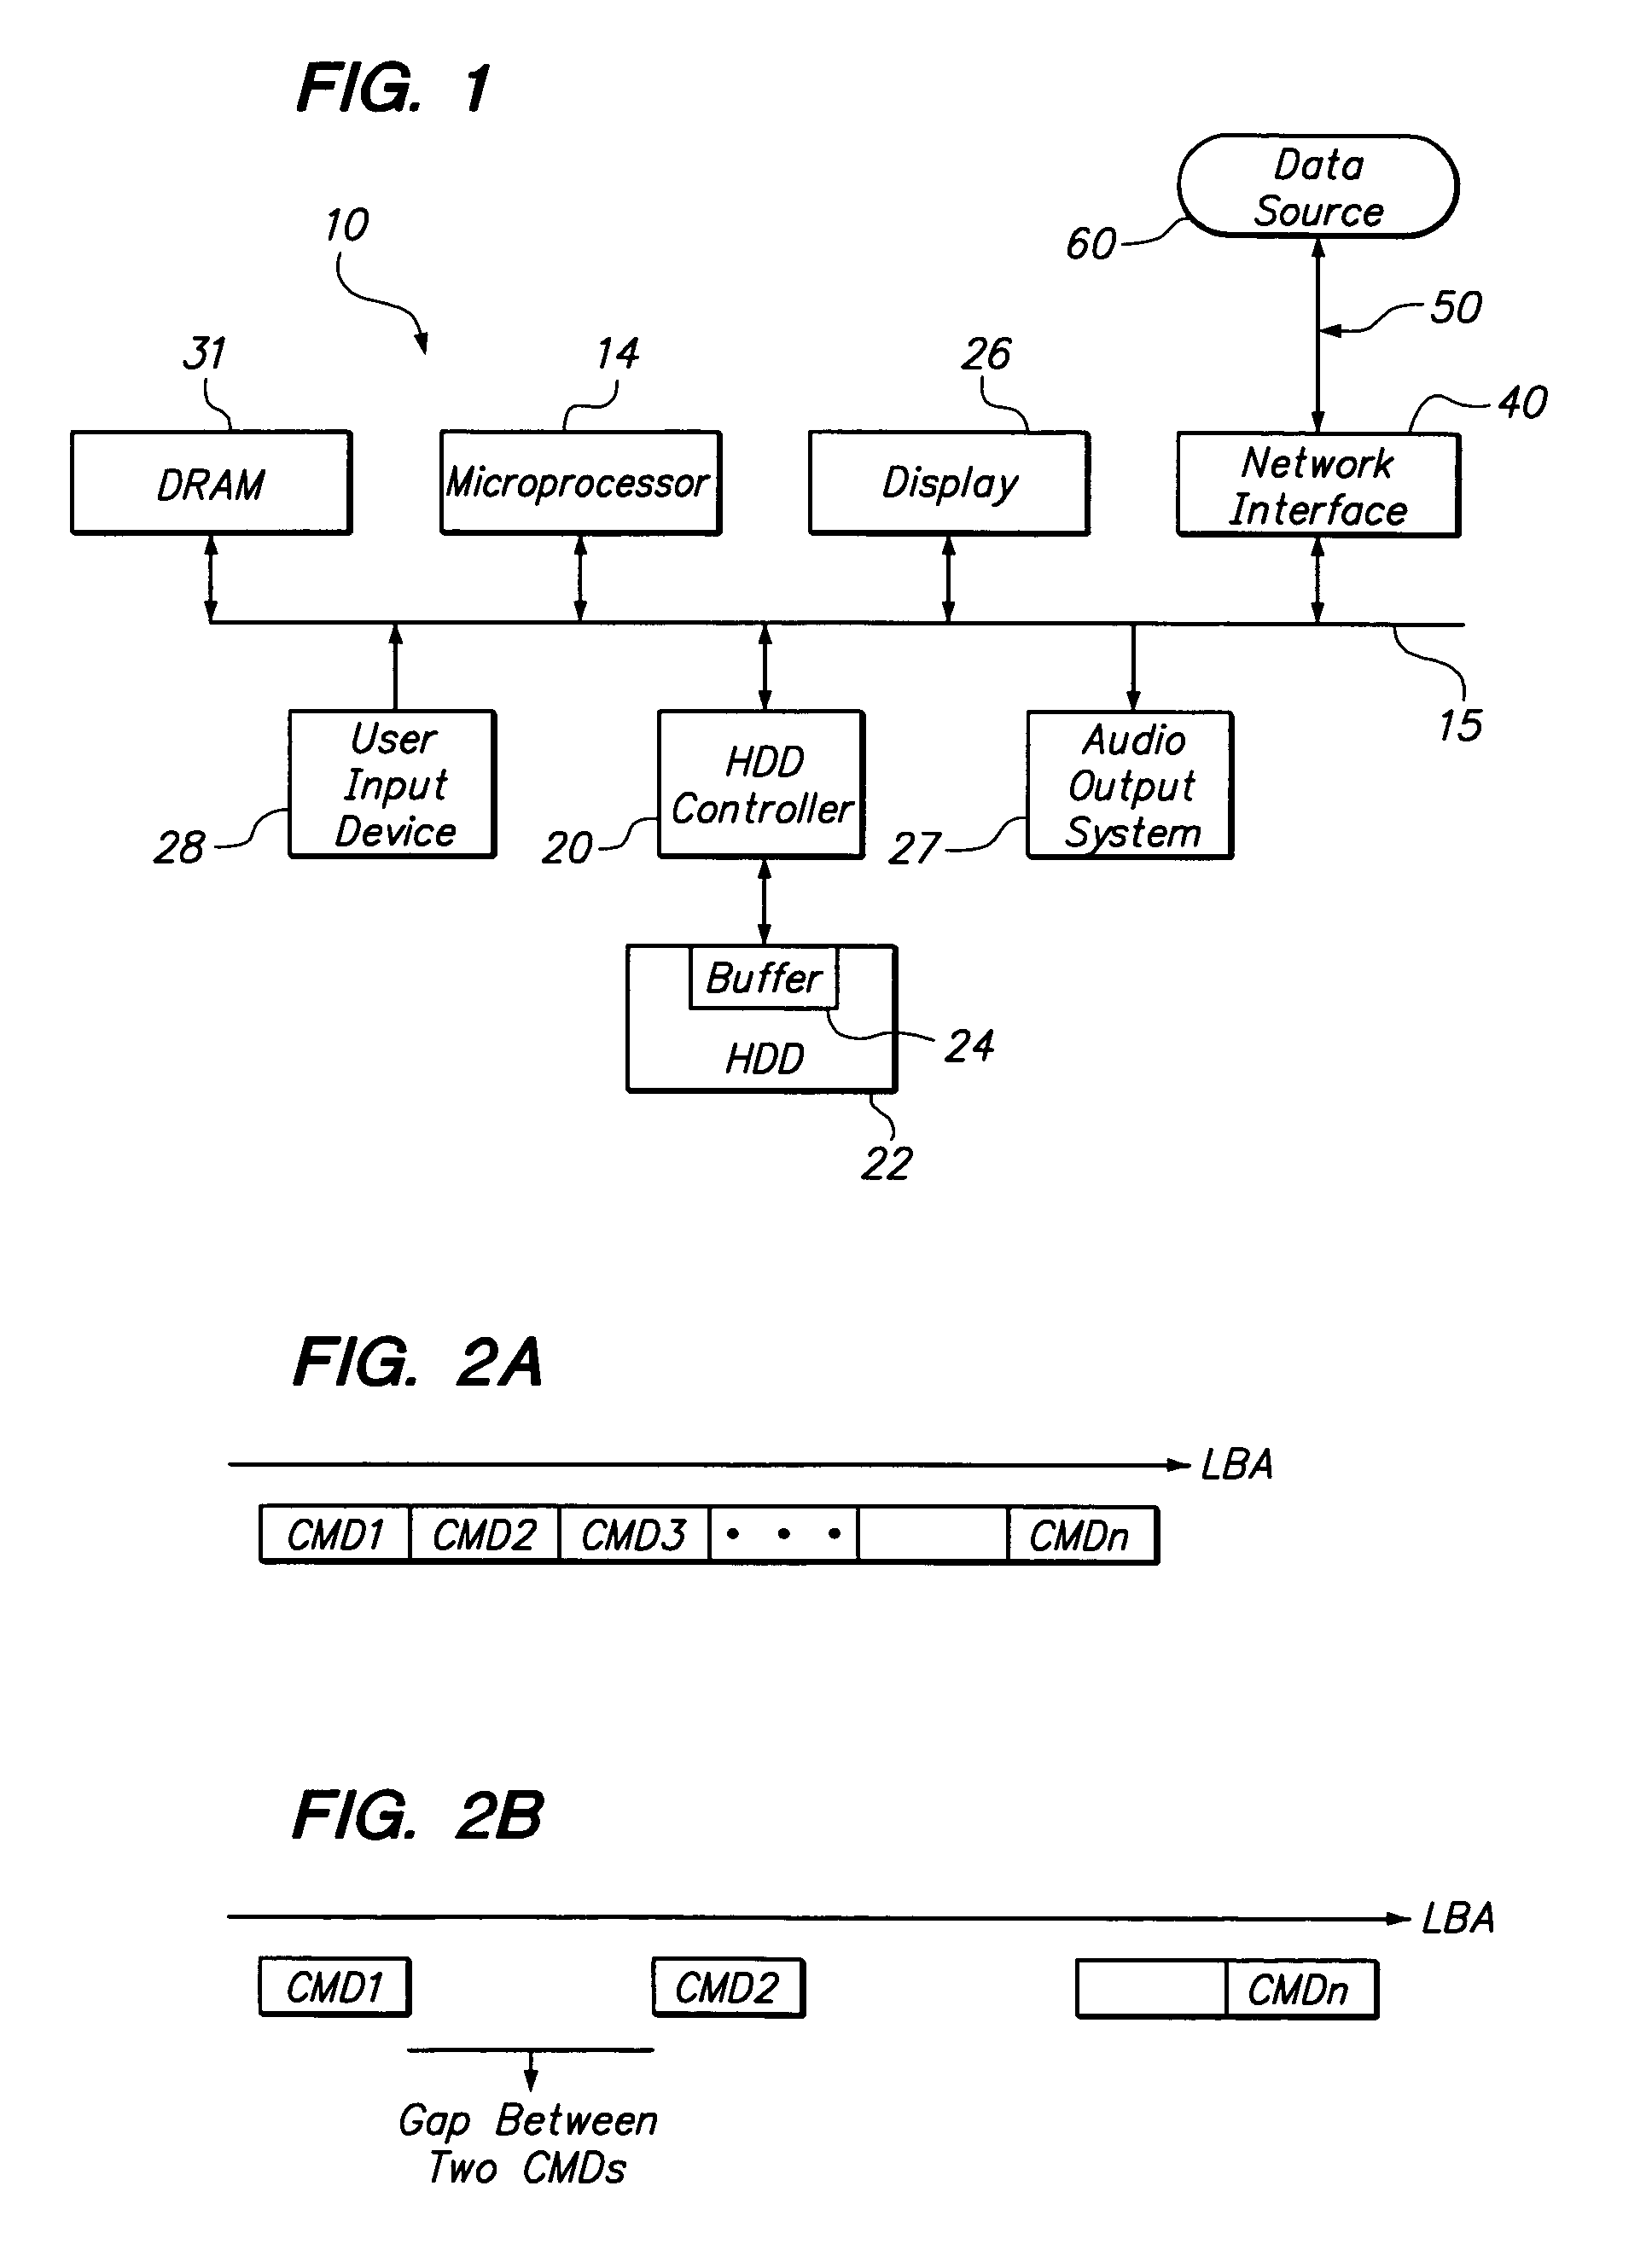 Method and apparatus for detection and management of data streams